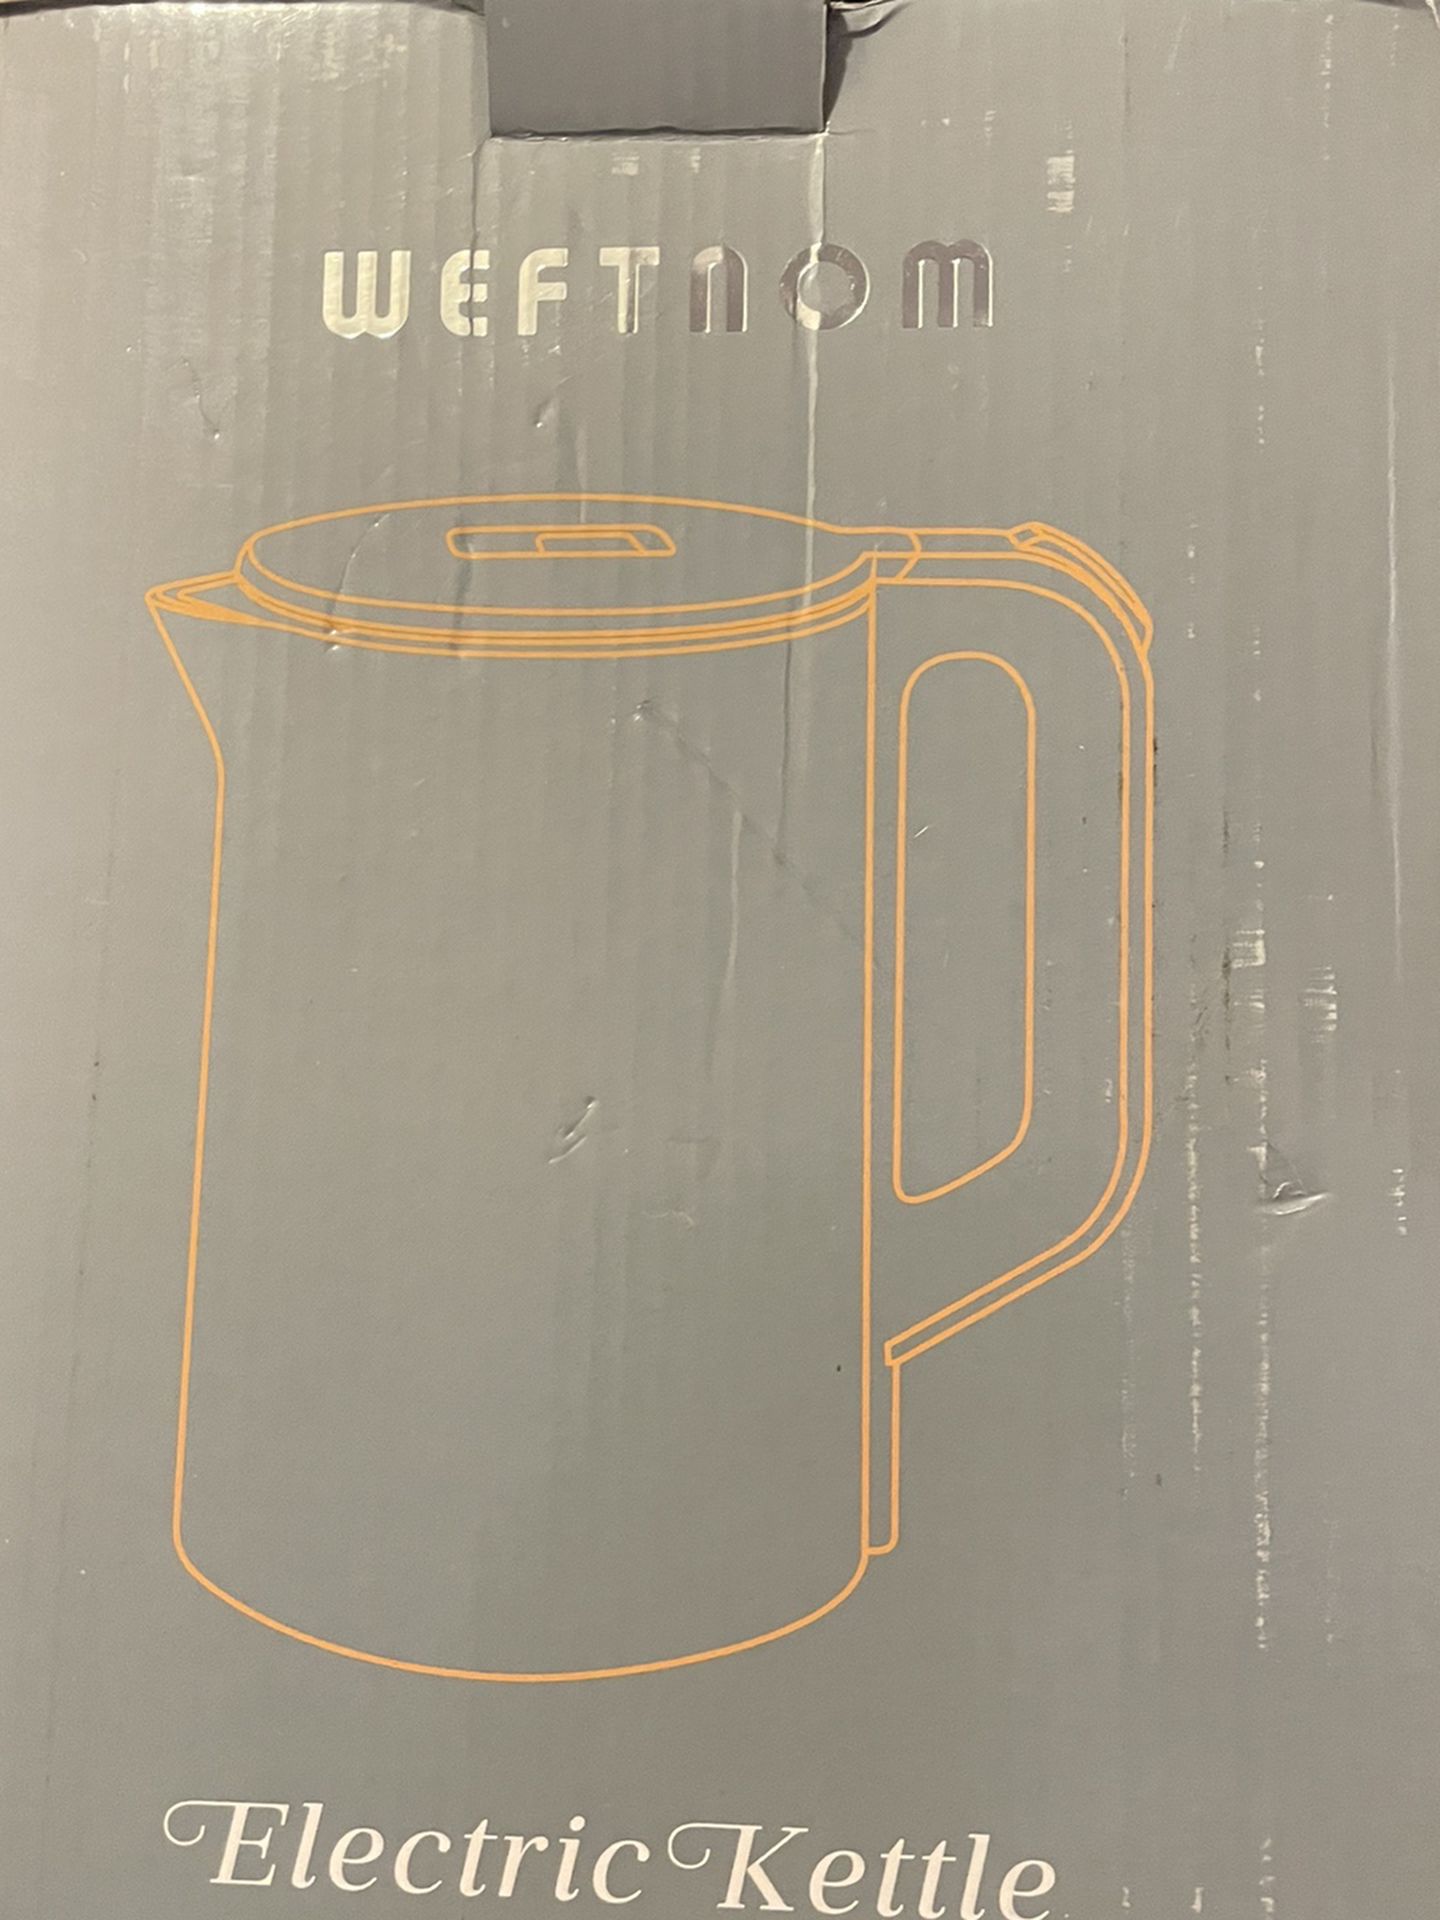 New Hot Water Kettle Modern By Westhom